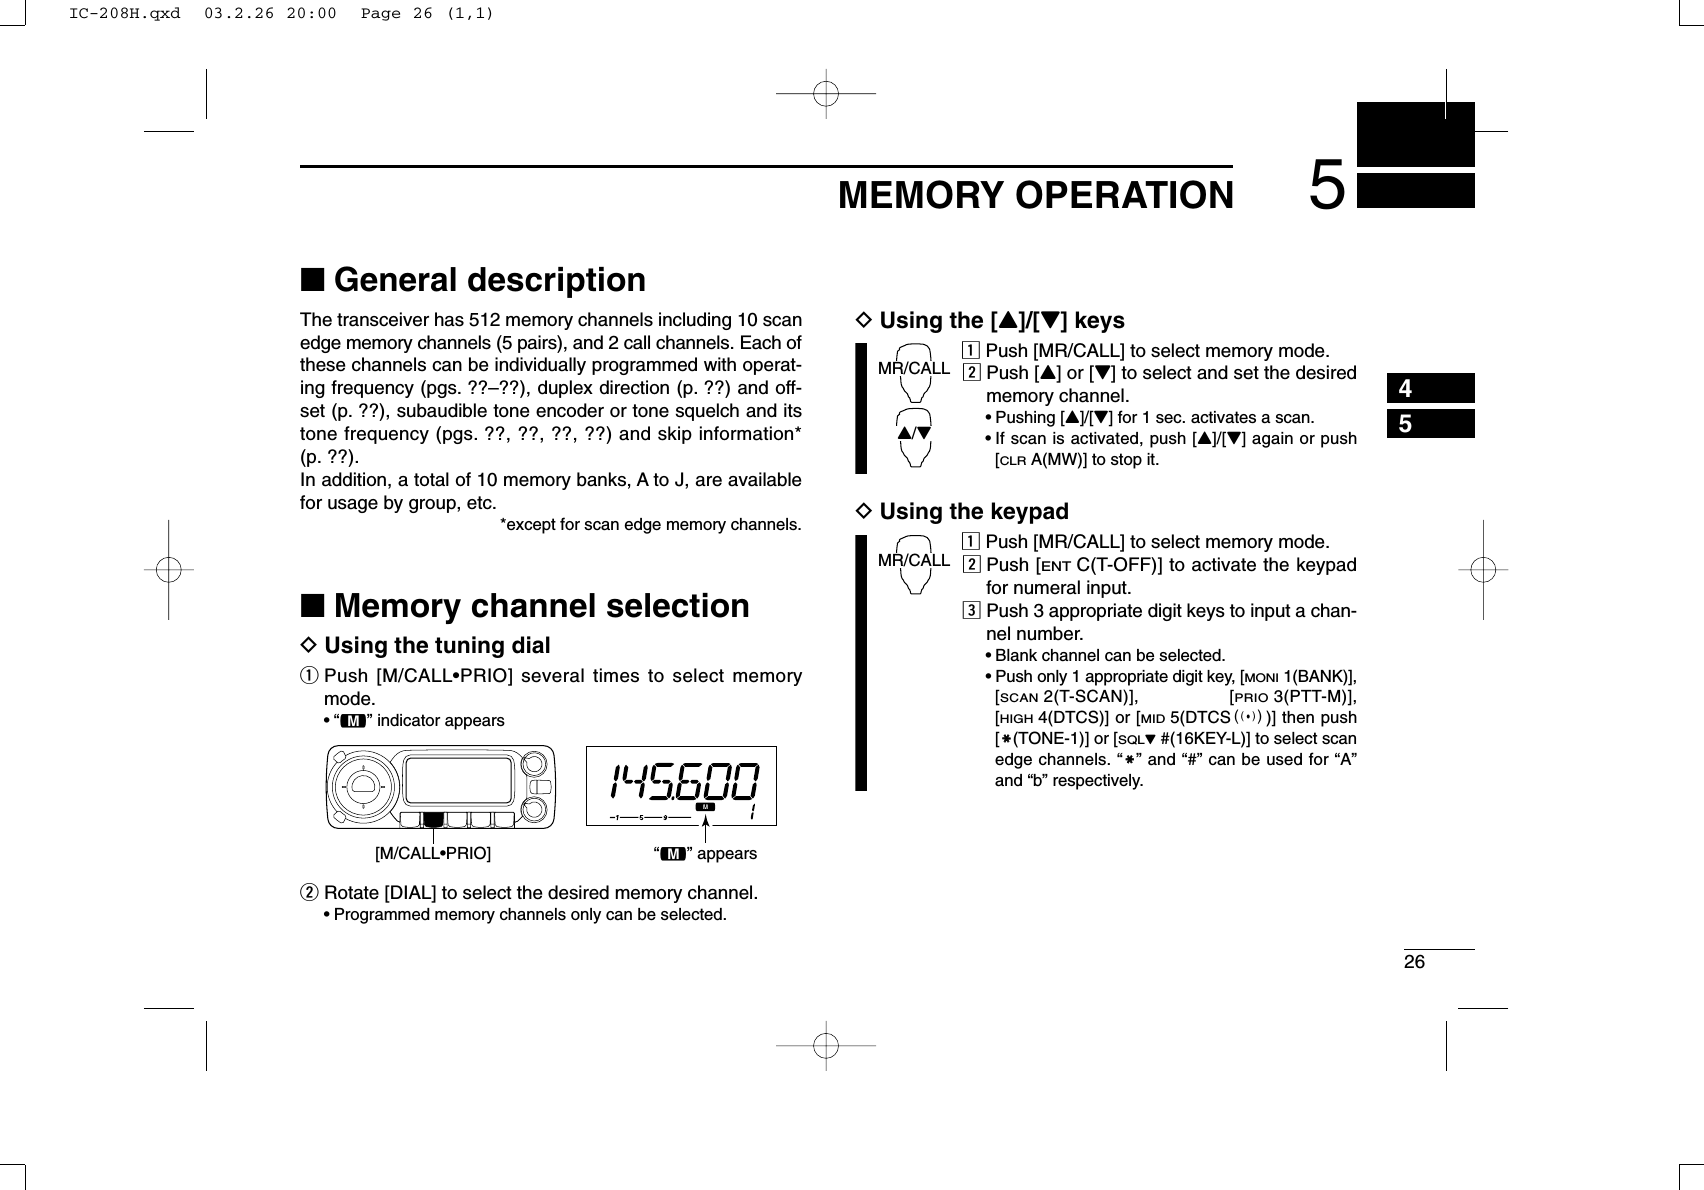 265MEMORY OPERATION45■General descriptionThe transceiver has 512 memory channels including 10 scanedge memory channels (5 pairs), and 2 call channels. Each ofthese channels can be individually programmed with operat-ing frequency (pgs. ??–??), duplex direction (p. ??) and off-set (p. ??), subaudible tone encoder or tone squelch and itstone frequency (pgs. ??, ??, ??, ??) and skip information*(p. ??). In addition, a total of 10 memory banks, A to J, are availablefor usage by group, etc.*except for scan edge memory channels.■Memory channel selectionDUsing the tuning dialqPush [M/CALL•PRIO] several times to select memorymode.•“!” indicator appearswRotate [DIAL] to select the desired memory channel.•Programmed memory channels only can be selected.DUsing the [Y]/[Z] keyszPush [MR/CALL] to select memory mode.xPush [Y] or [Z] to select and set the desiredmemory channel.•Pushing [Y]/[Z] for 1 sec. activates a scan.•If scan is activated, push [Y]/[Z] again or push[CLRA(MW)] to stop it.DUsing the keypadzPush [MR/CALL] to select memory mode.xPush [ENTC(T-OFF)] to activate the keypadfor numeral input.cPush 3 appropriate digit keys to input a chan-nel number. •Blank channel can be selected.•Push only 1 appropriate digit key, [MONI1(BANK)],[SCAN2(T-SCAN)], [PRIO3(PTT-M)],[HIGH4(DTCS)] or [MID5(DTCSS)] then push[MM(TONE-1)] or [SQLZ#(16KEY-L)] to select scanedge channels. “MM” and “#” can be used for “A”and “b” respectively.MR/CALLMR/CALLY/Z[M/CALL•PRIO] “!” appearsIC-208H.qxd  03.2.26 20:00  Page 26 (1,1)